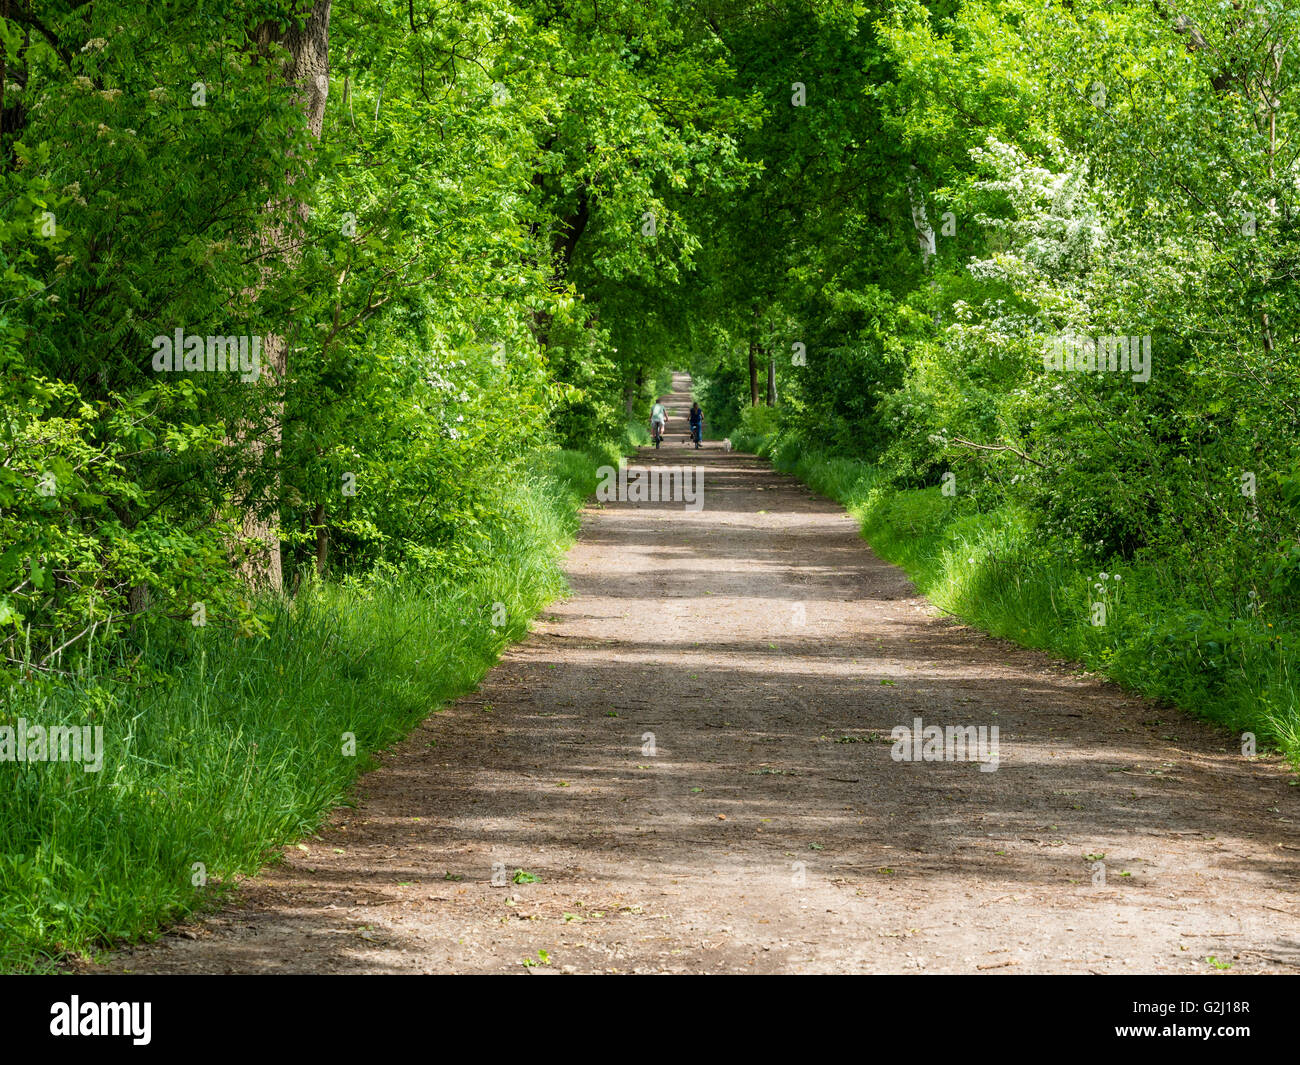 Rural road in forest, spring, Celle, Germany Stock Photo